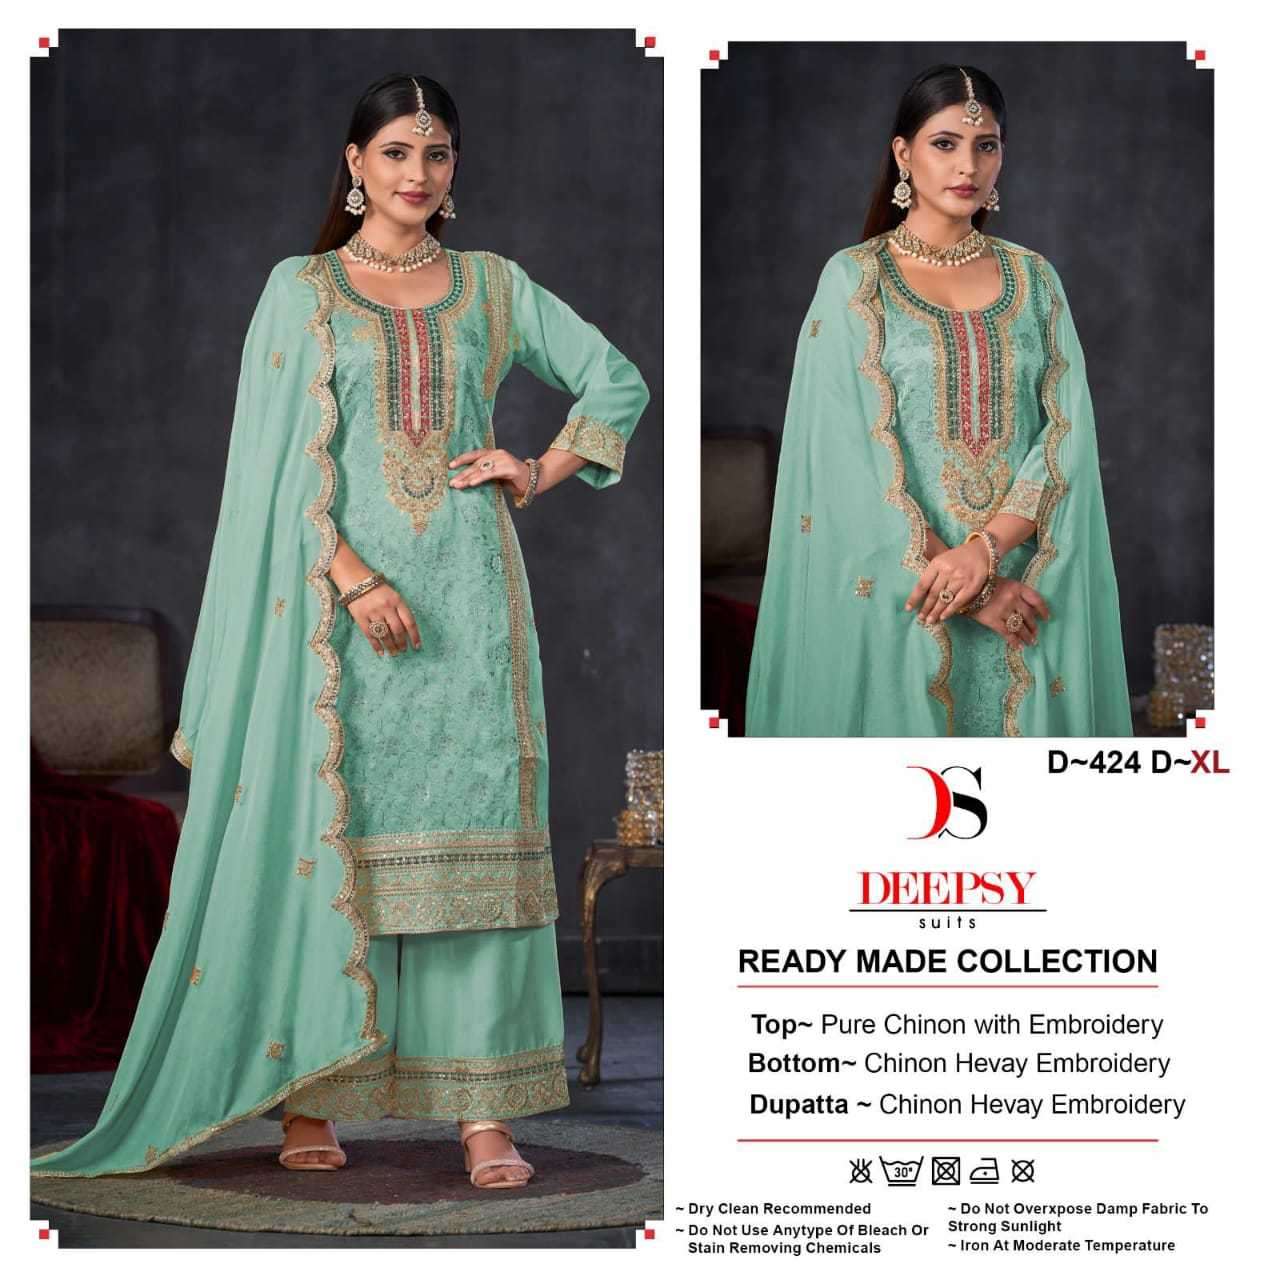 DEEPSY SERIES 424 DESIGNER WITH EMBROIDERY WORK READYMADE CHINON SUITS ARE AVAILABLE AT WHOLESALE PRICE